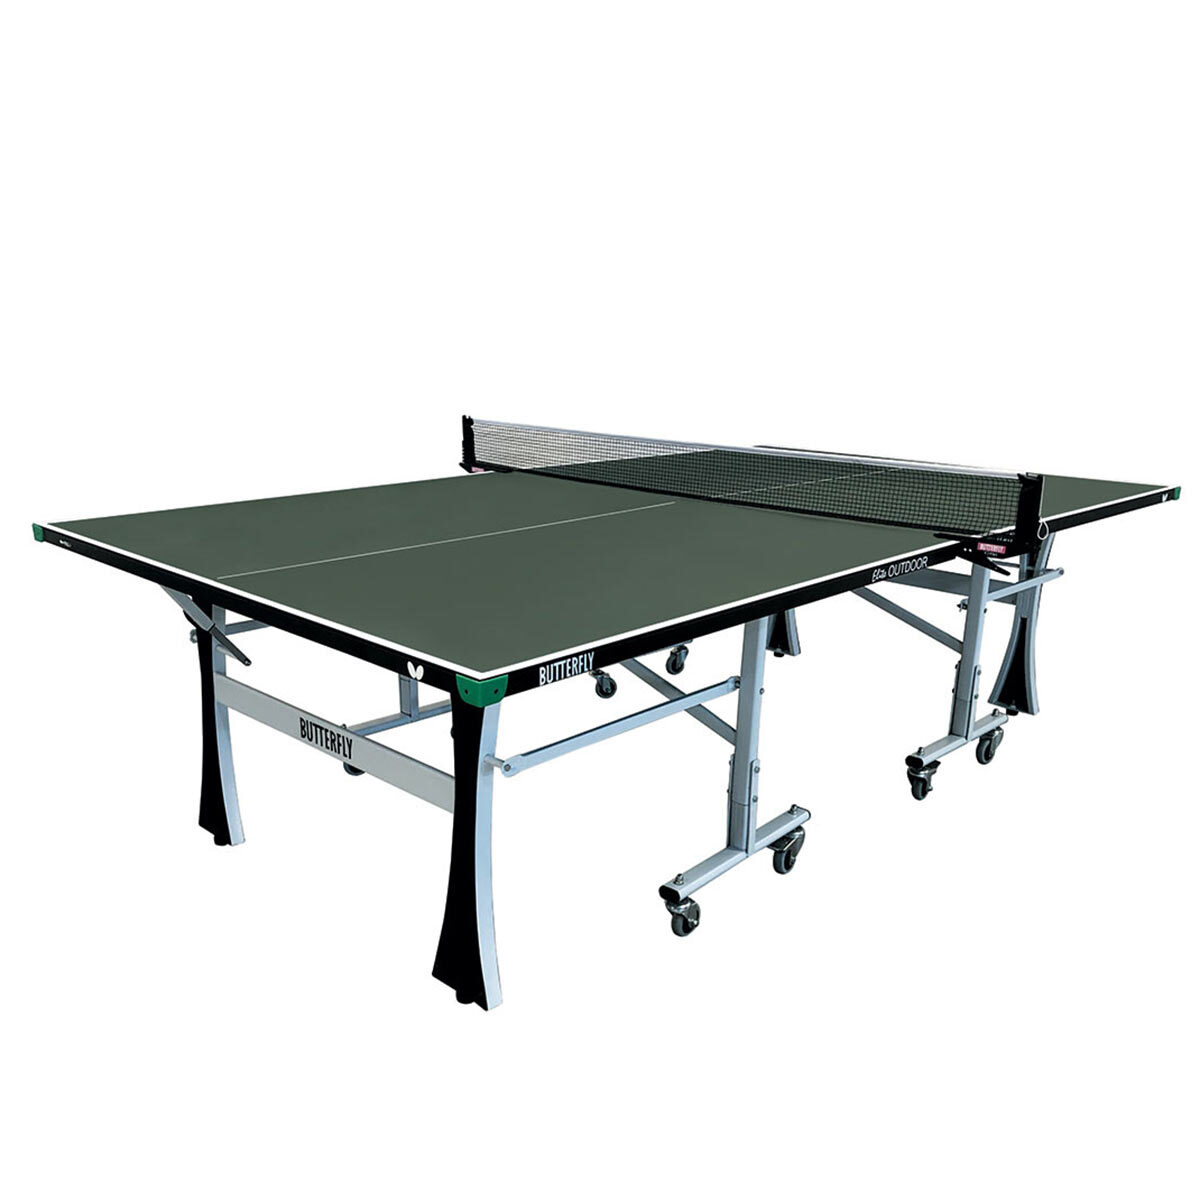 Butterfly Elite Outdoor Table Tennis Table Costco Uk